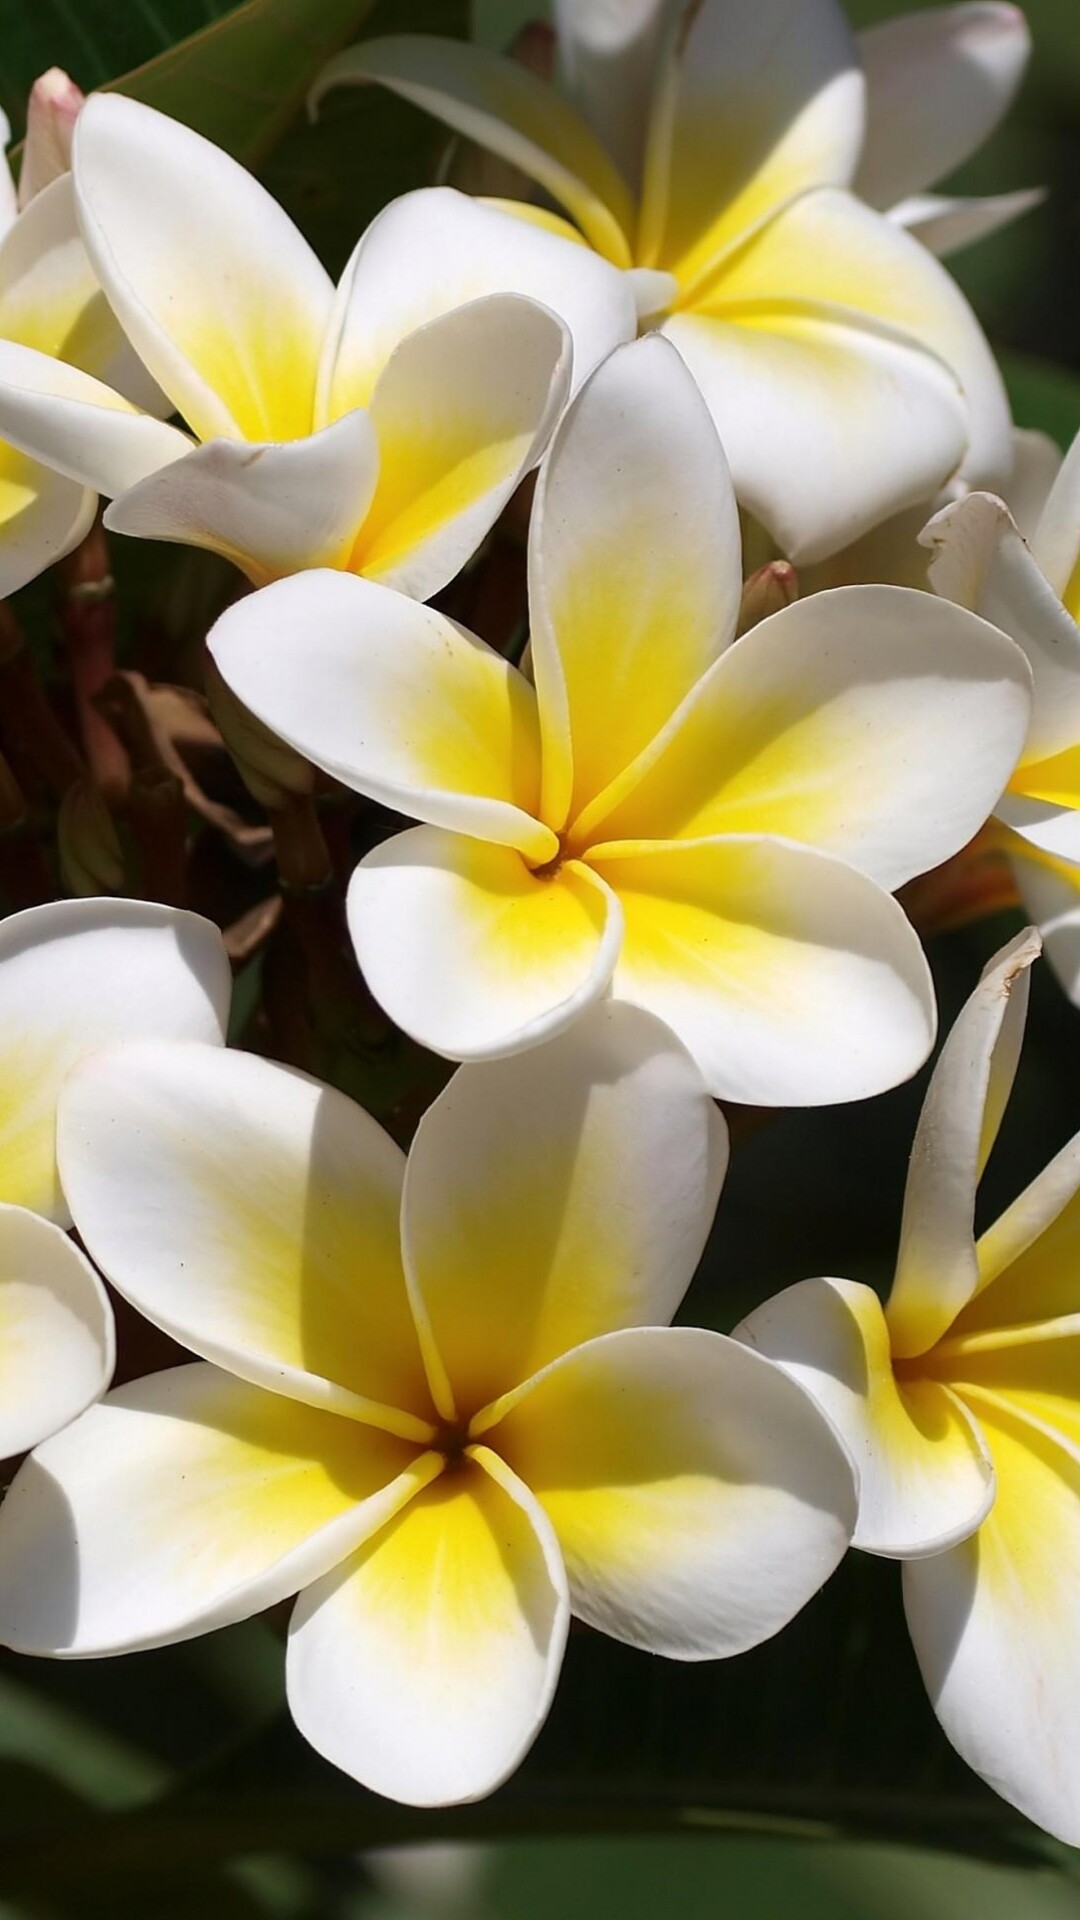 Frangipani Flower: These flowers are comprised of 5 petals that are arranged in a slightly spiralling pattern. 1080x1920 Full HD Wallpaper.